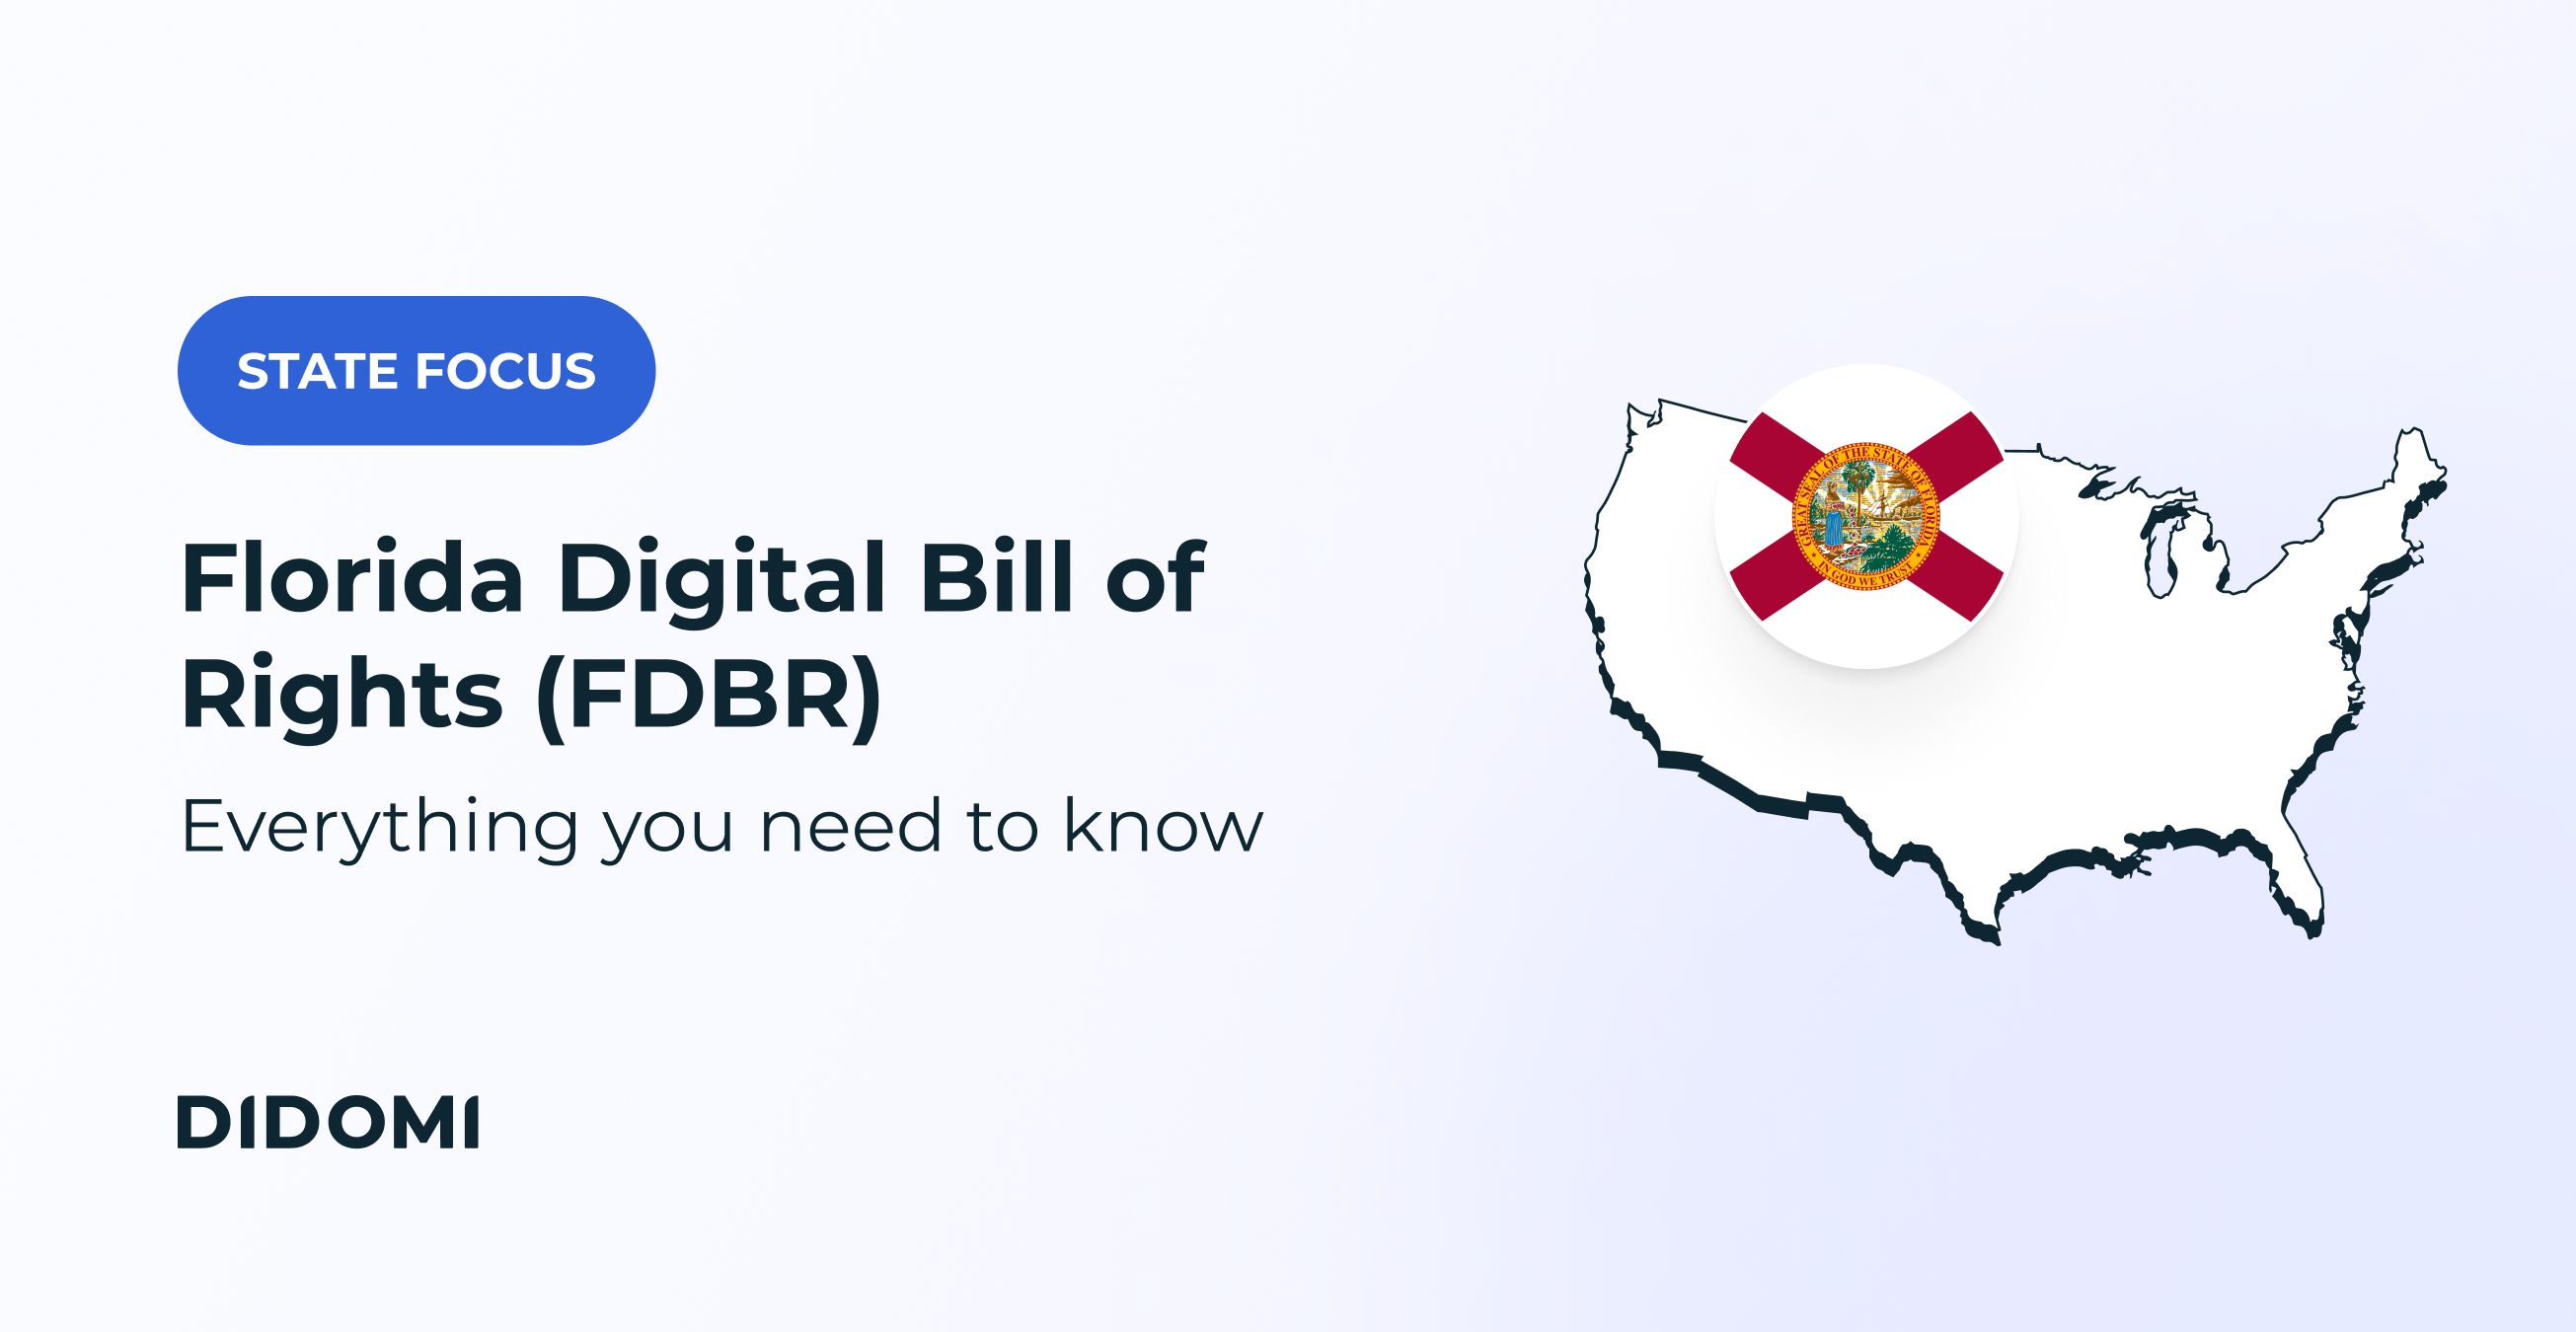 Florida digital bill of rights: Everything you need to know